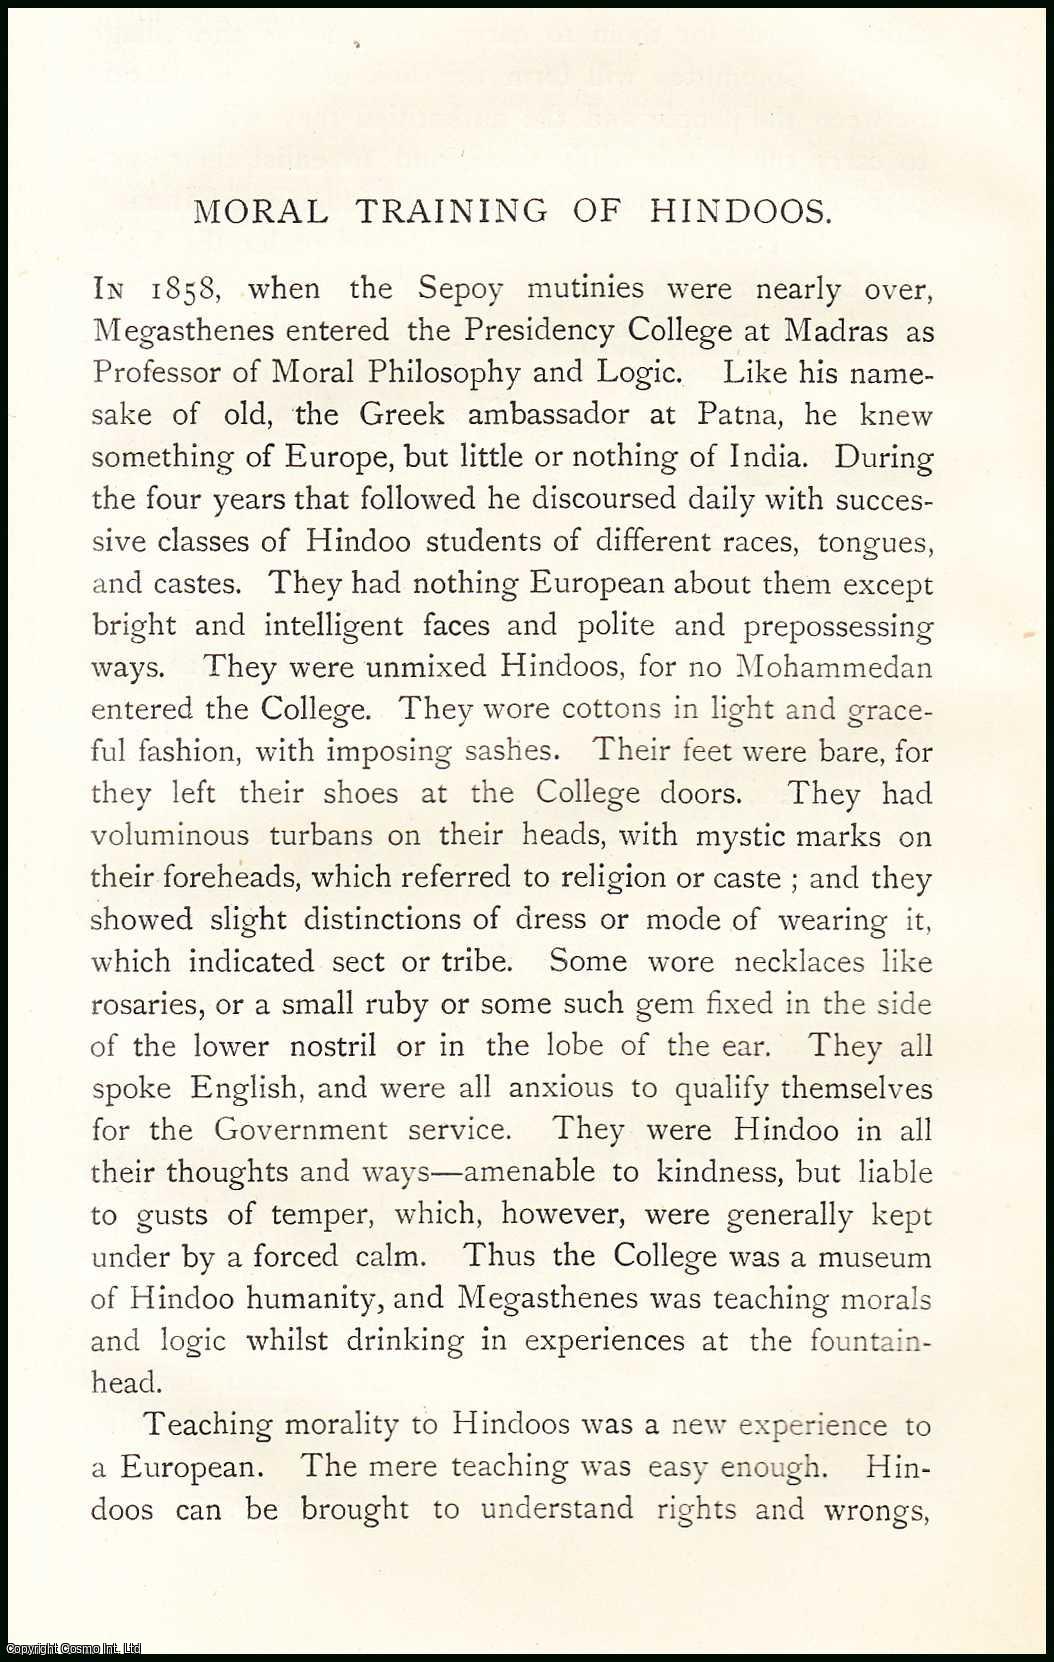 J. Talboys Wheeler - Moral Training of Hindoos. An uncommon original article from The Asiatic Quarterly Review, 1889.